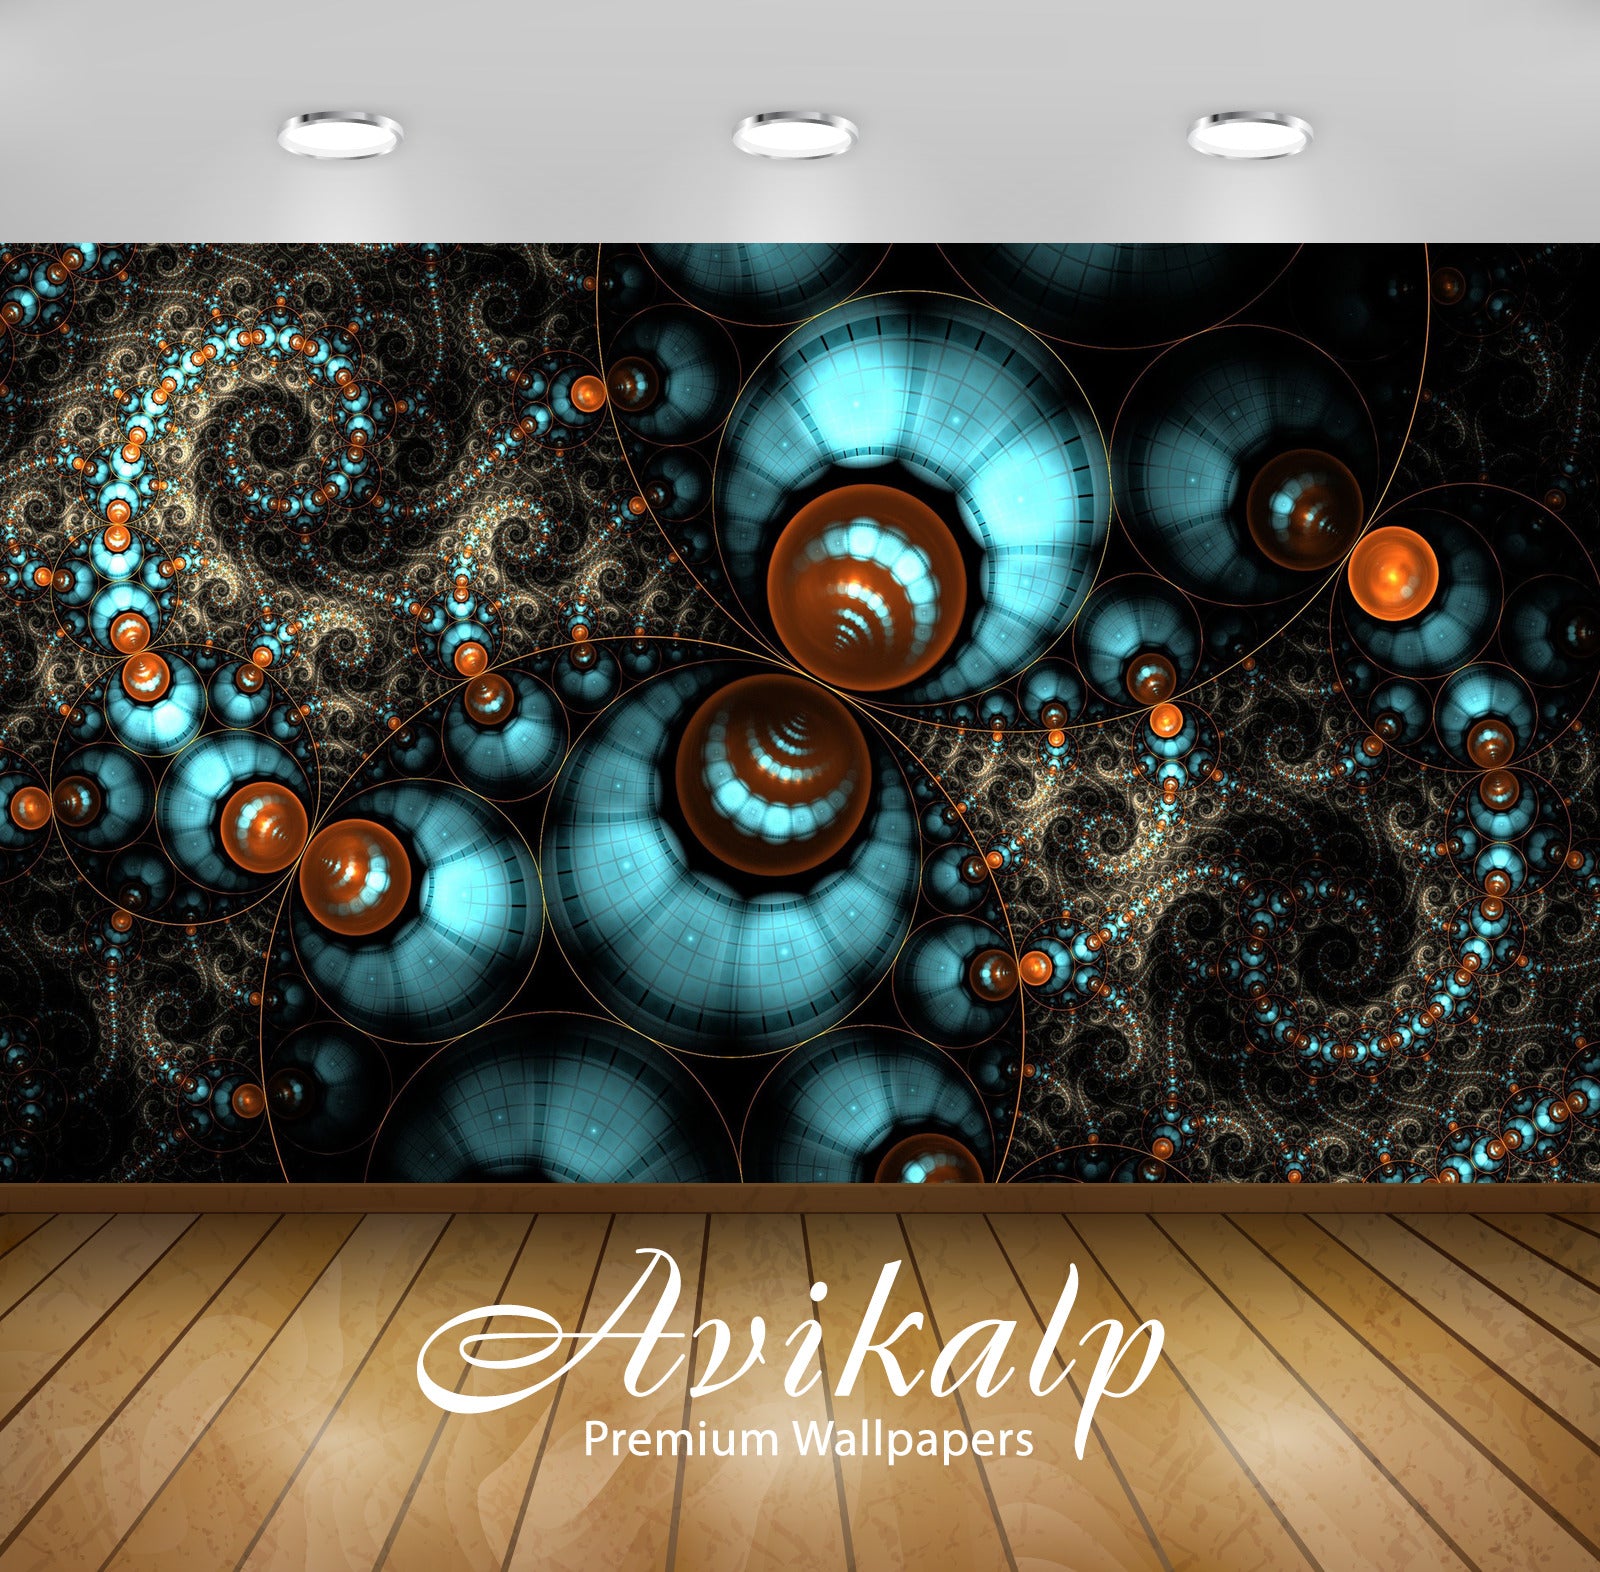 Avikalp Exclusive Awi4347 Fractal Circles Full HD Wallpapers for Living room, Hall, Kids Room, Kitch